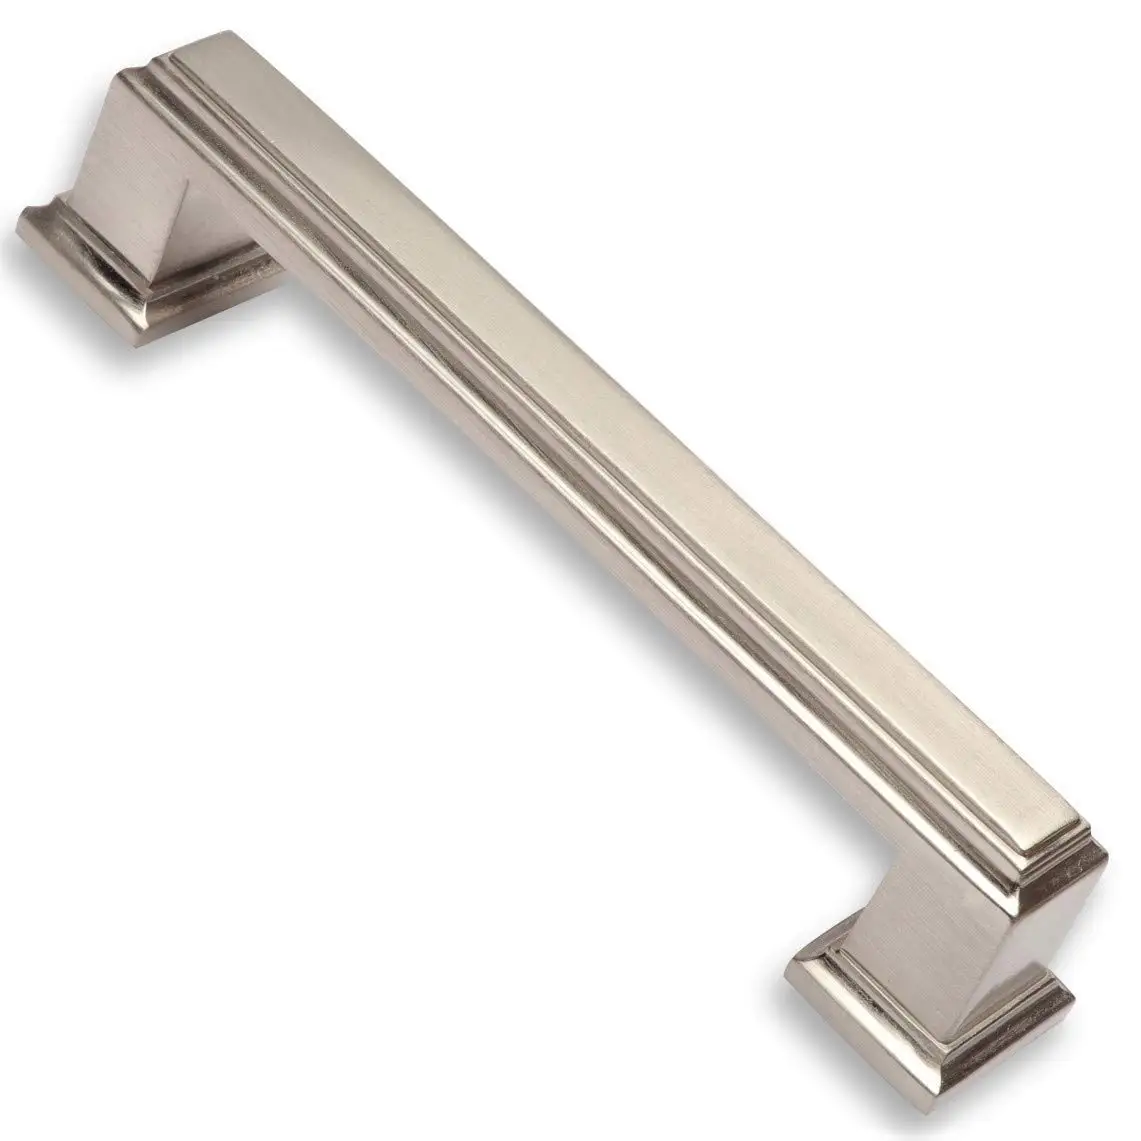 Buy Southern Hills 4" Brushed Nickel Pulls (Pack of 5) Satin